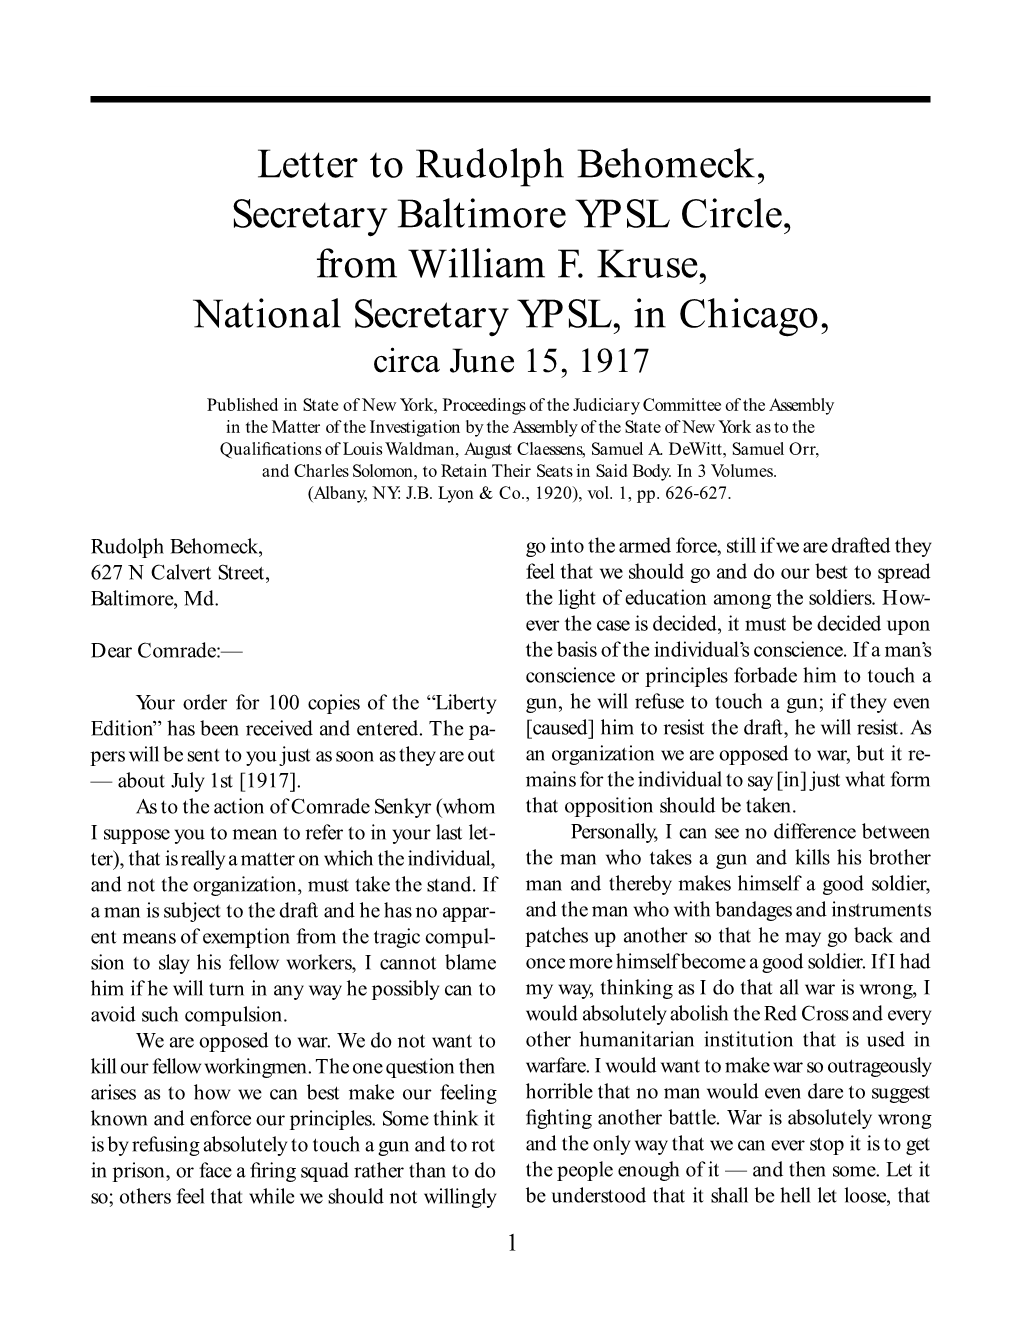 Letter to Rudolph Behomeck, Secretary Baltimore YPSL Circle, from William F